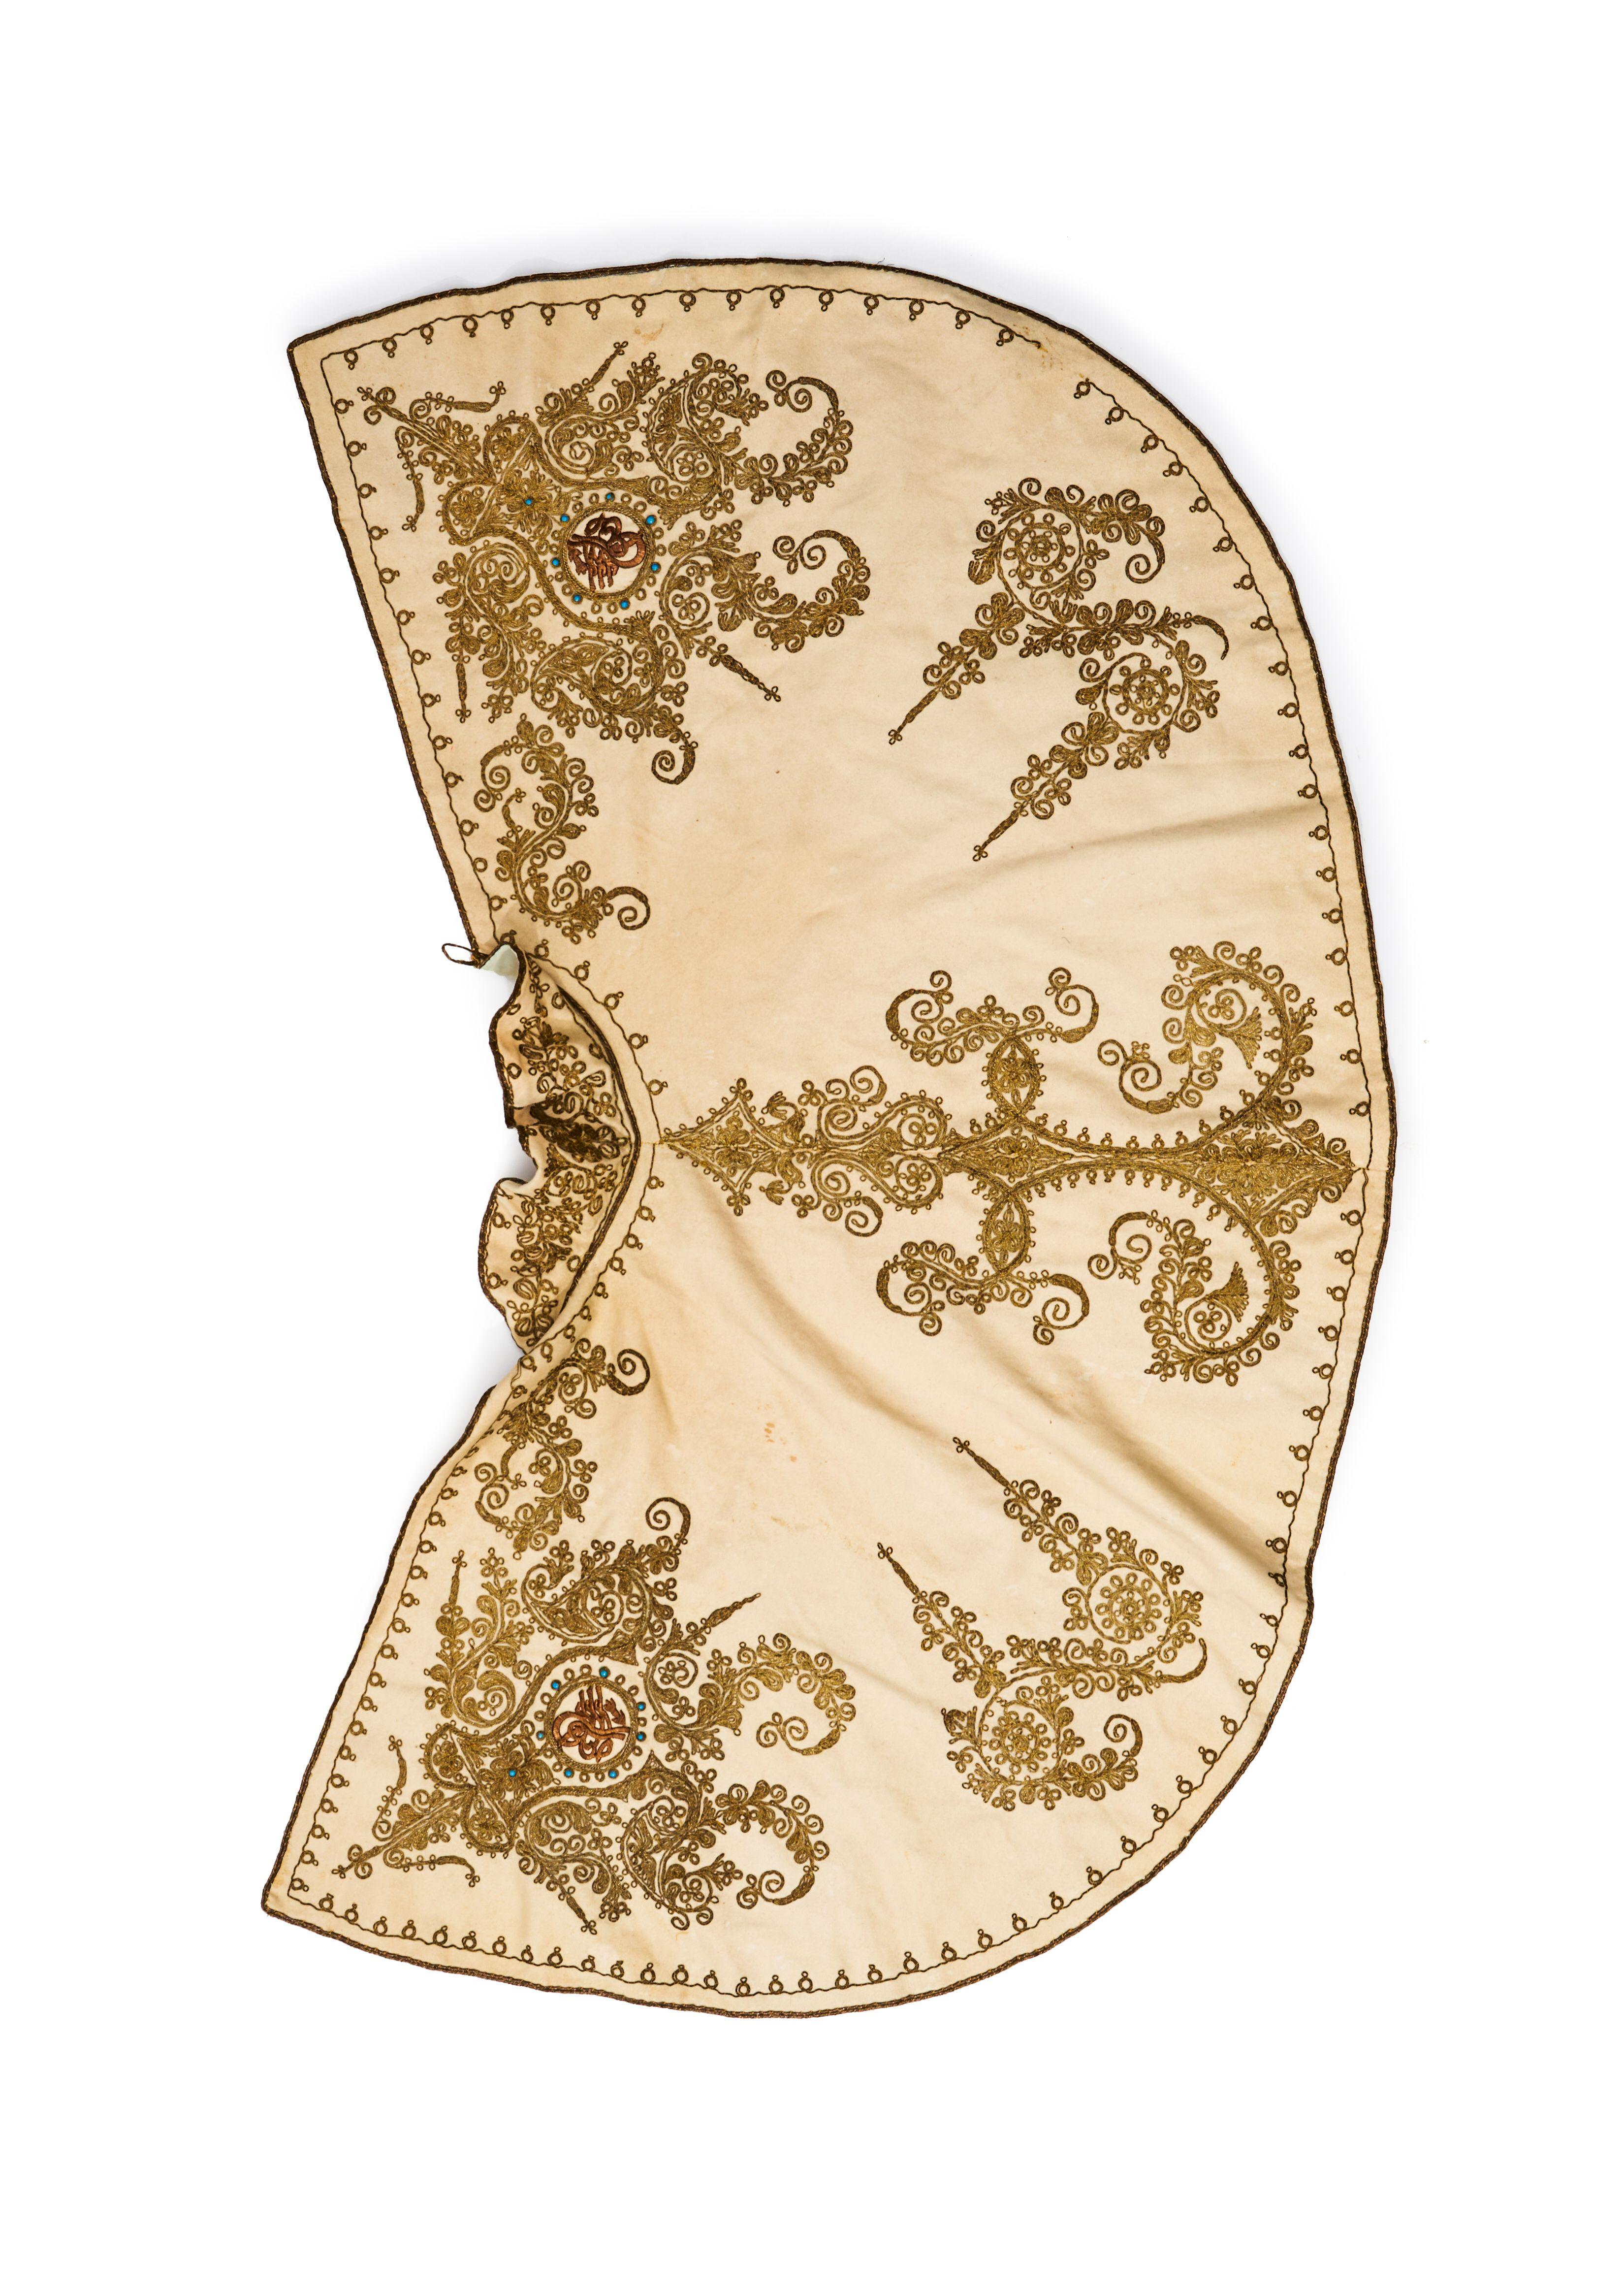 SILK, WOOL AND SILVER GILT MOROCCAN EMBROIDERY CEREMONIAL CAPE - Image 3 of 5